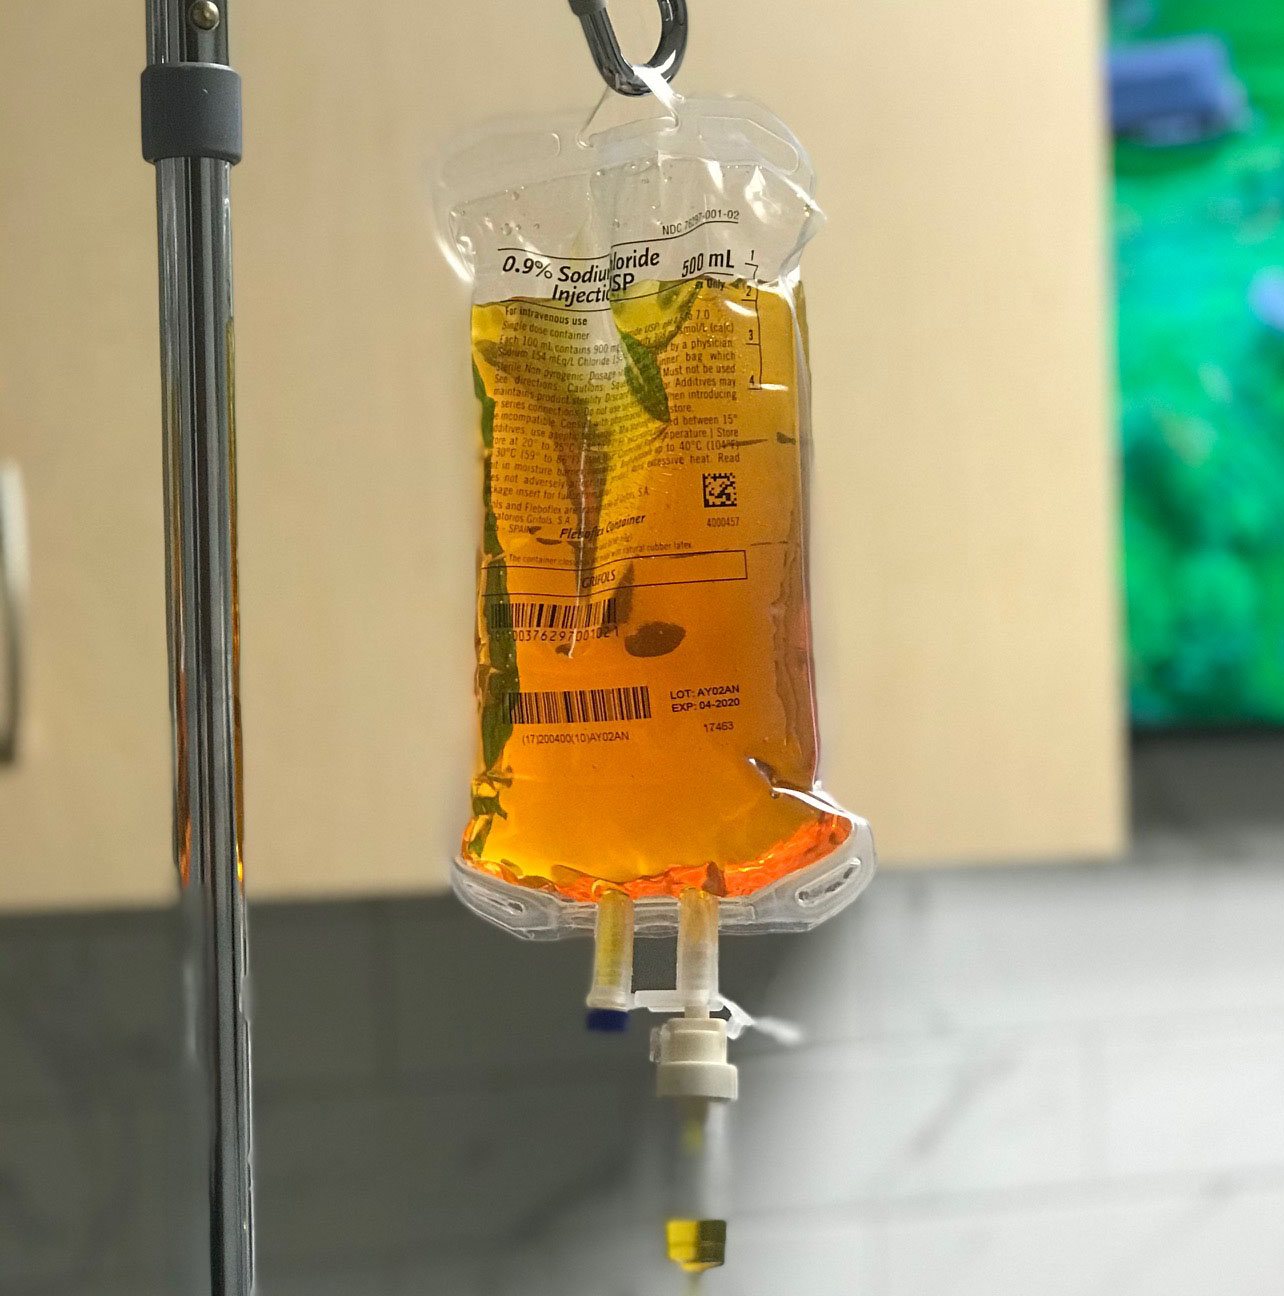 IV Infusion